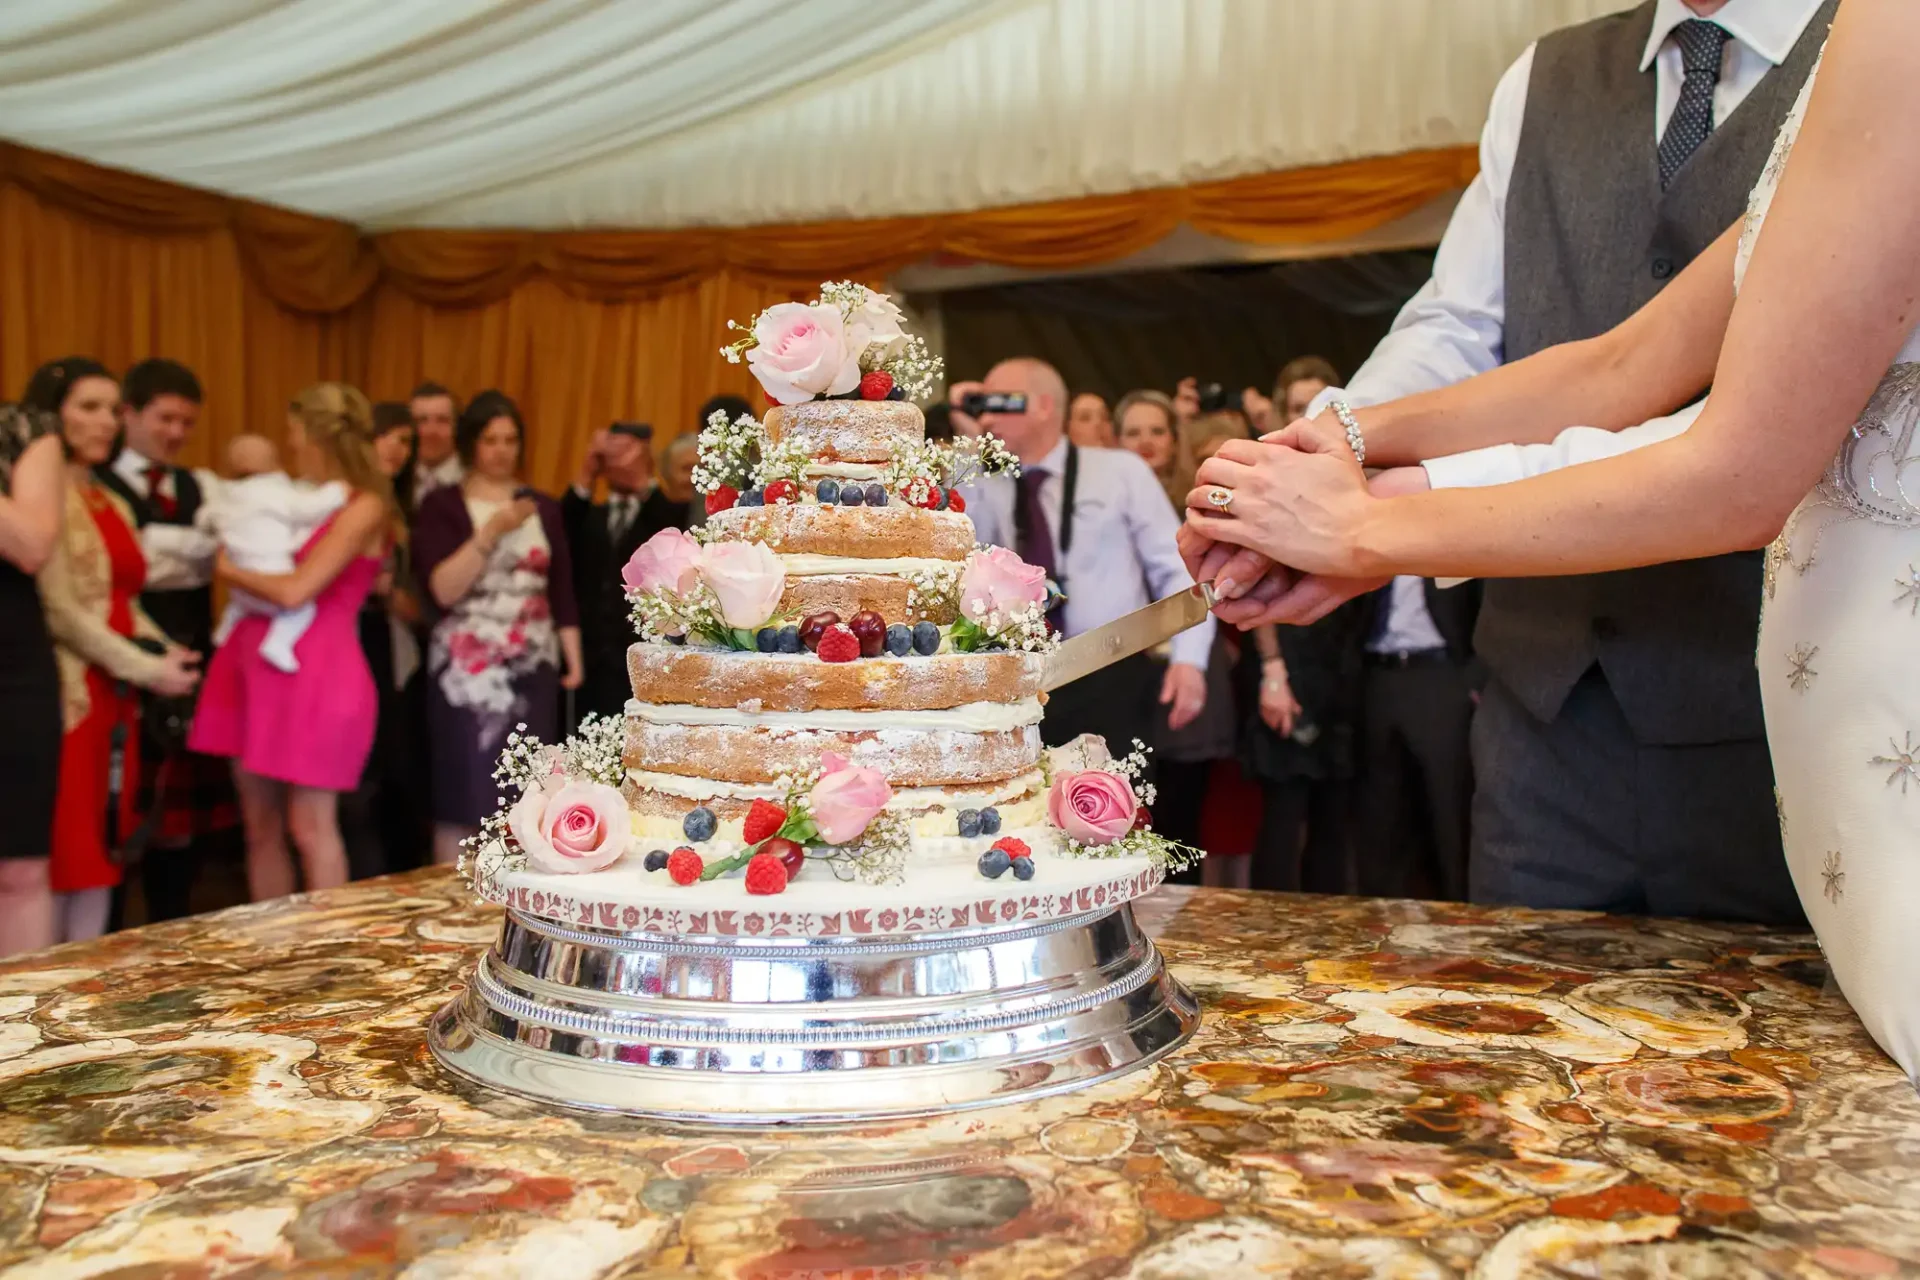 A bride and groom cutting a multi-tiered wedding cake adorned with fresh flowers, surrounded by guests in a tent.